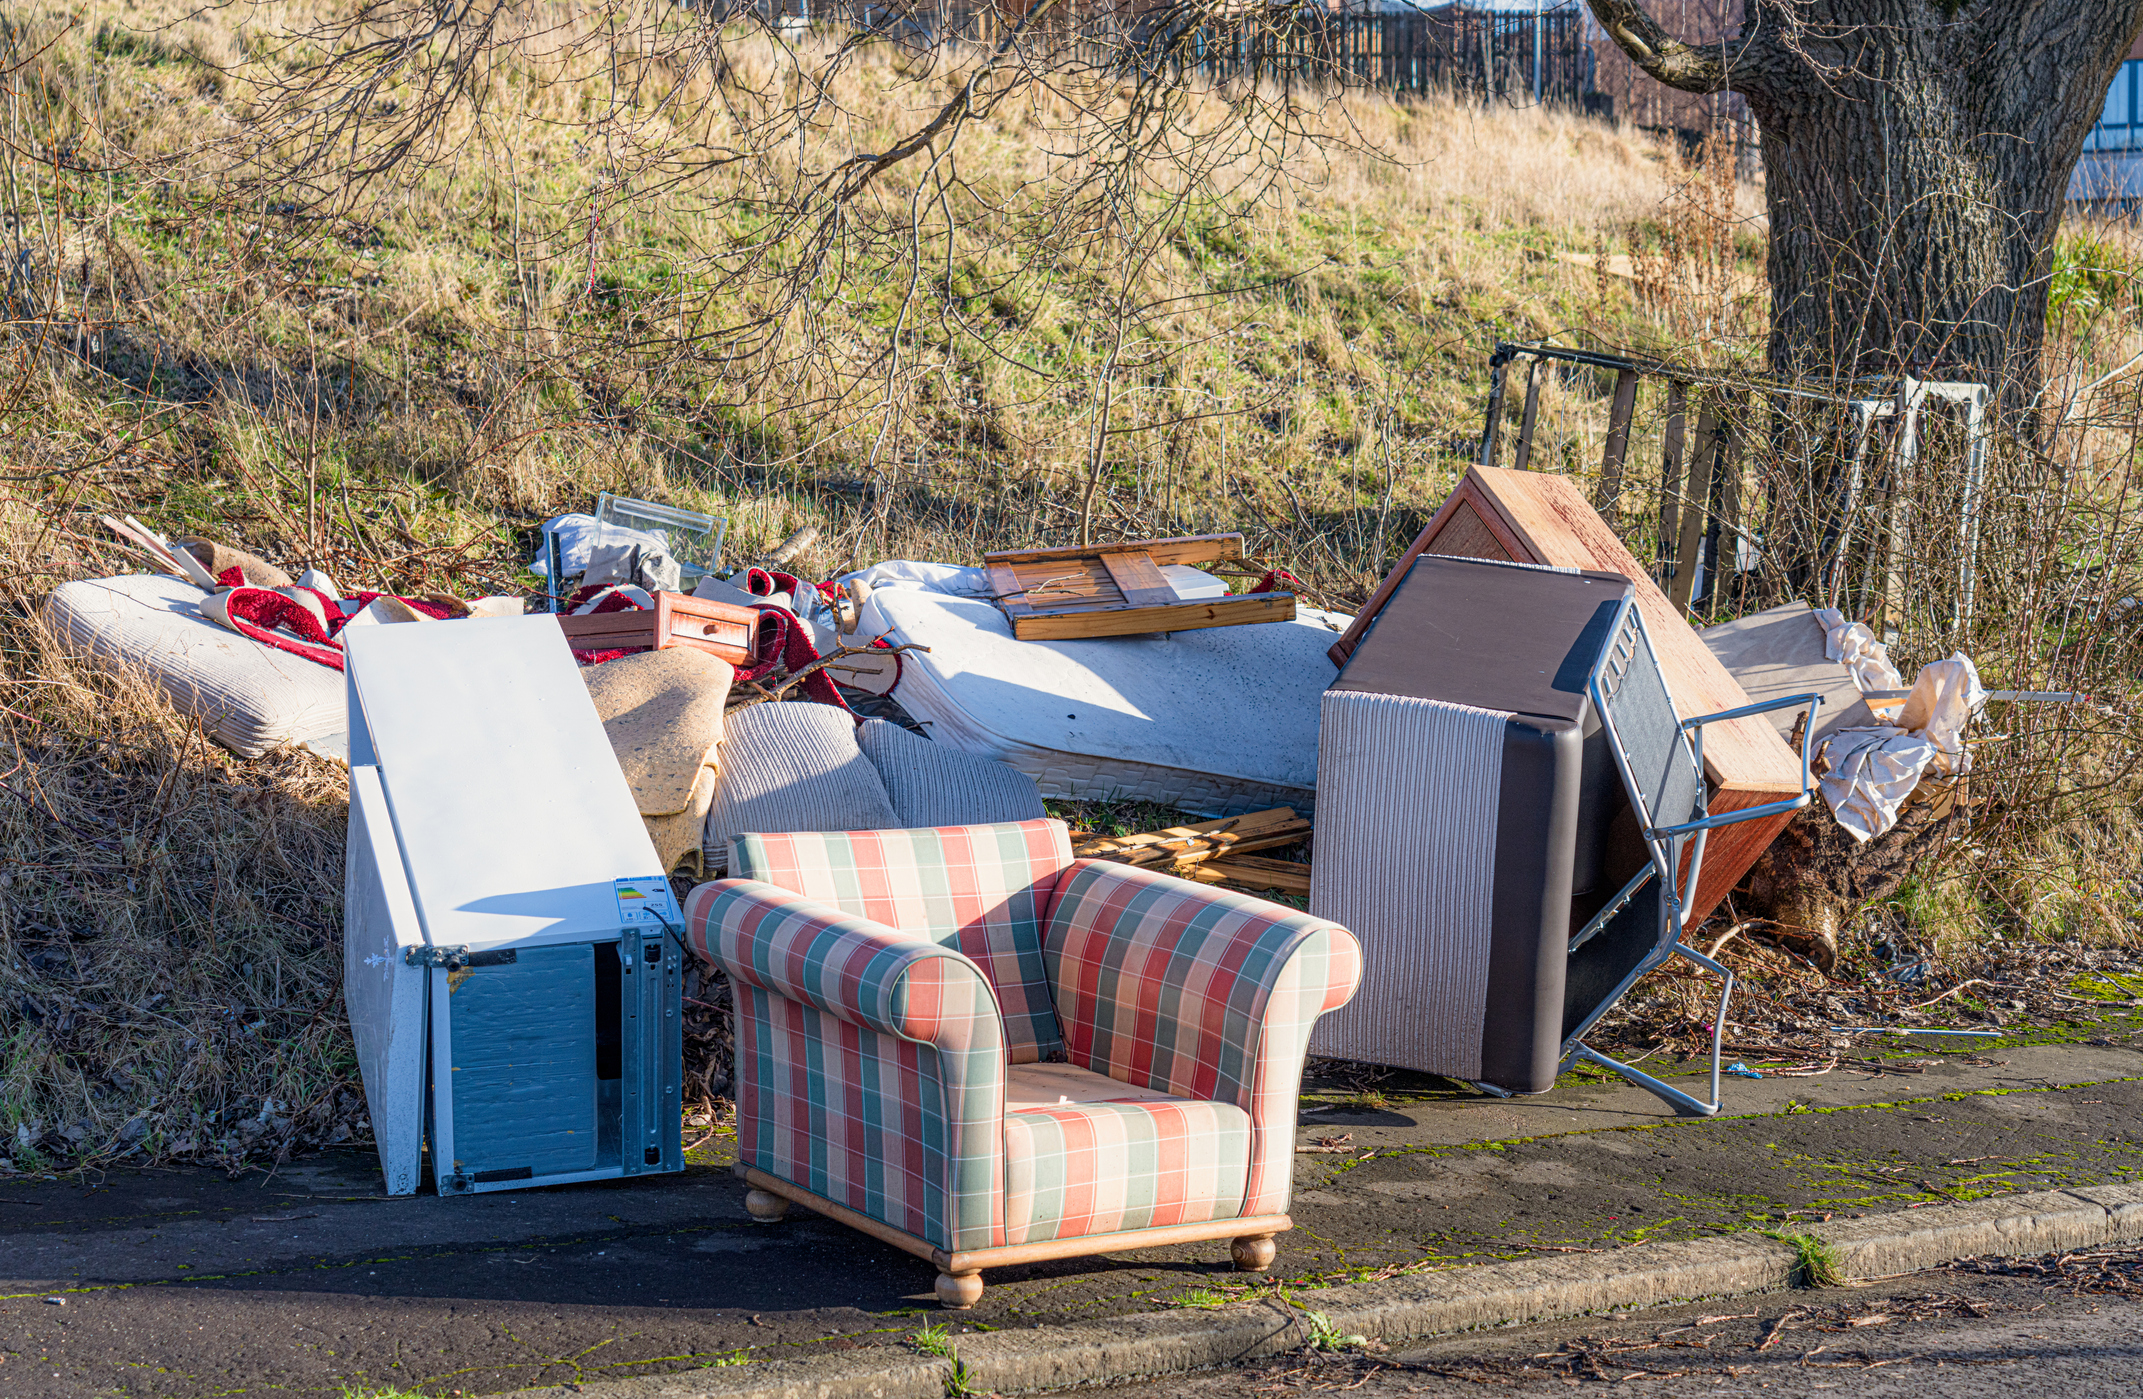 Unwanted household items left on the curbside, including an armchair, matress, fridge, cot and other items.